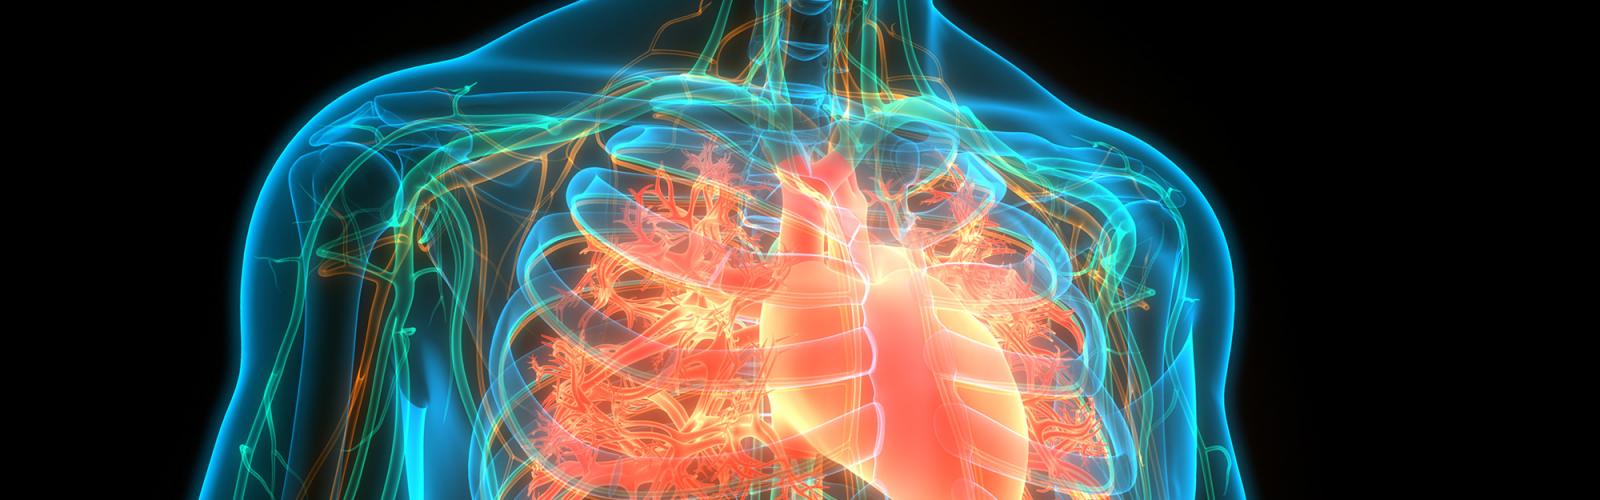 A 3D rendering of the cardiac system